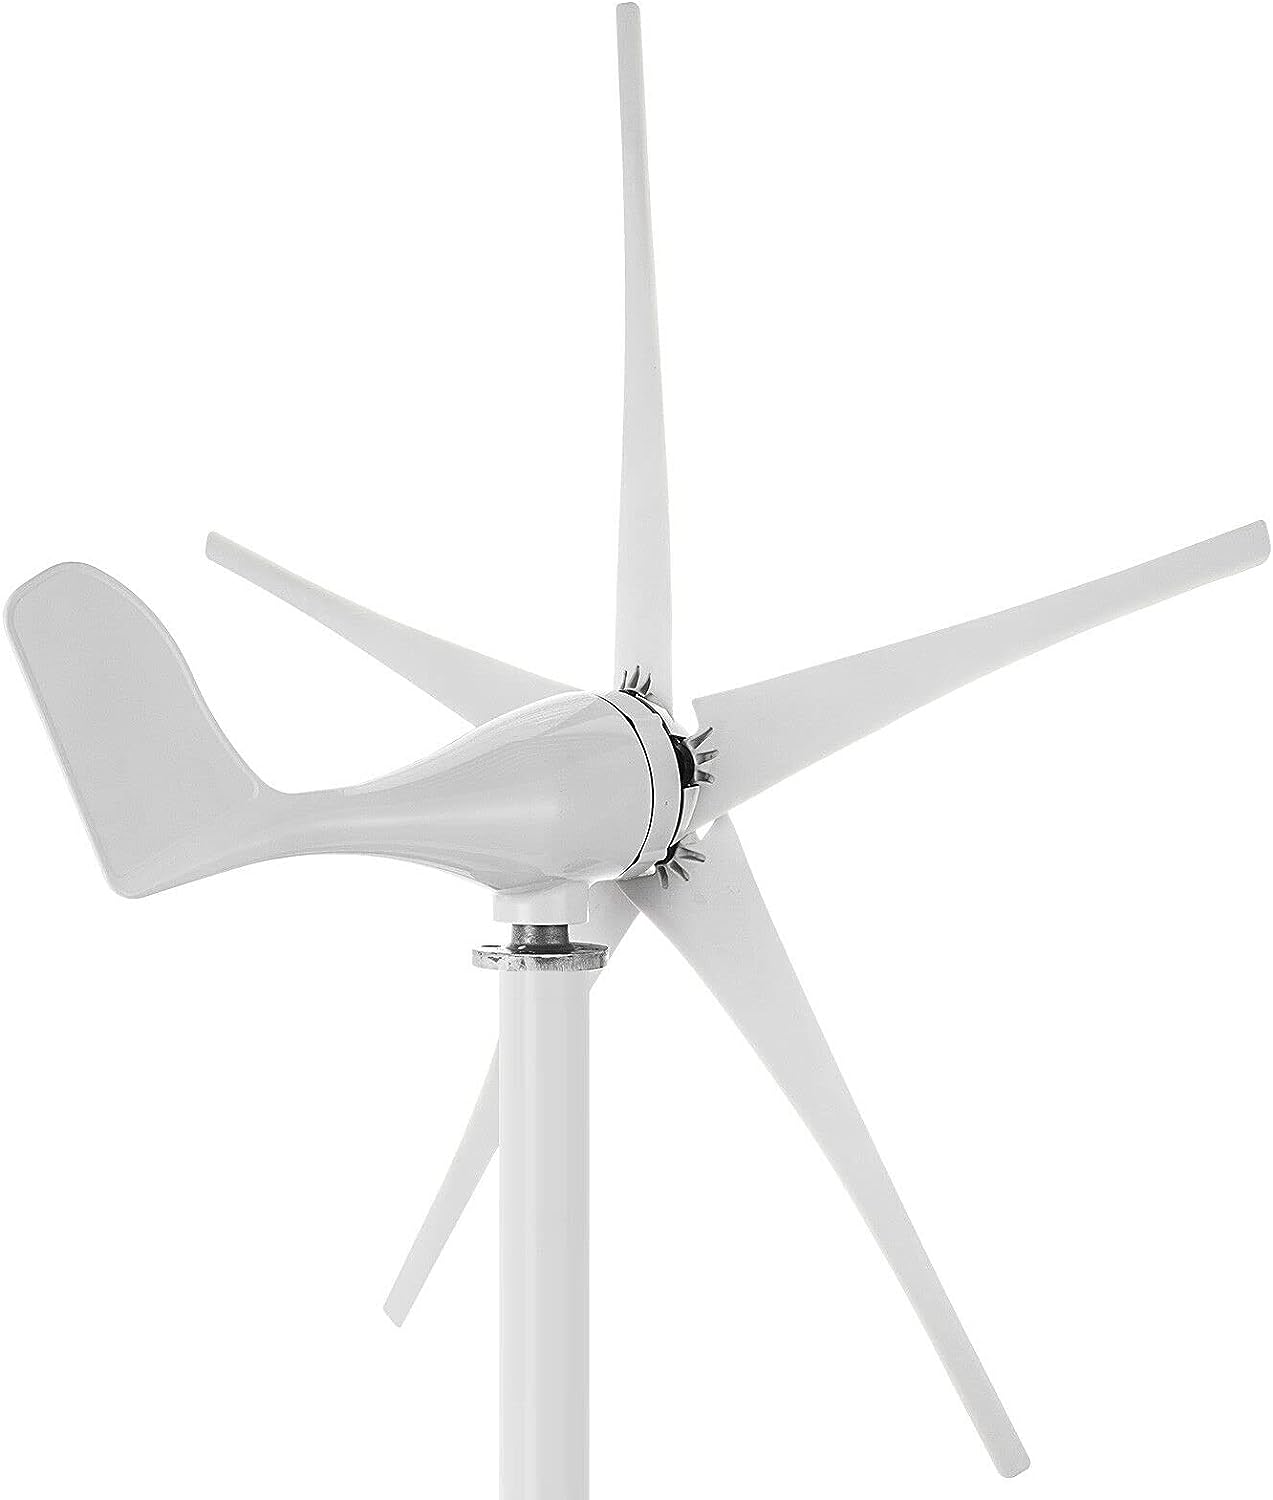 Wind Turbine, RX-400H5, 800W, 6 Blades, Free MPPT Controller Stainless Steel, White